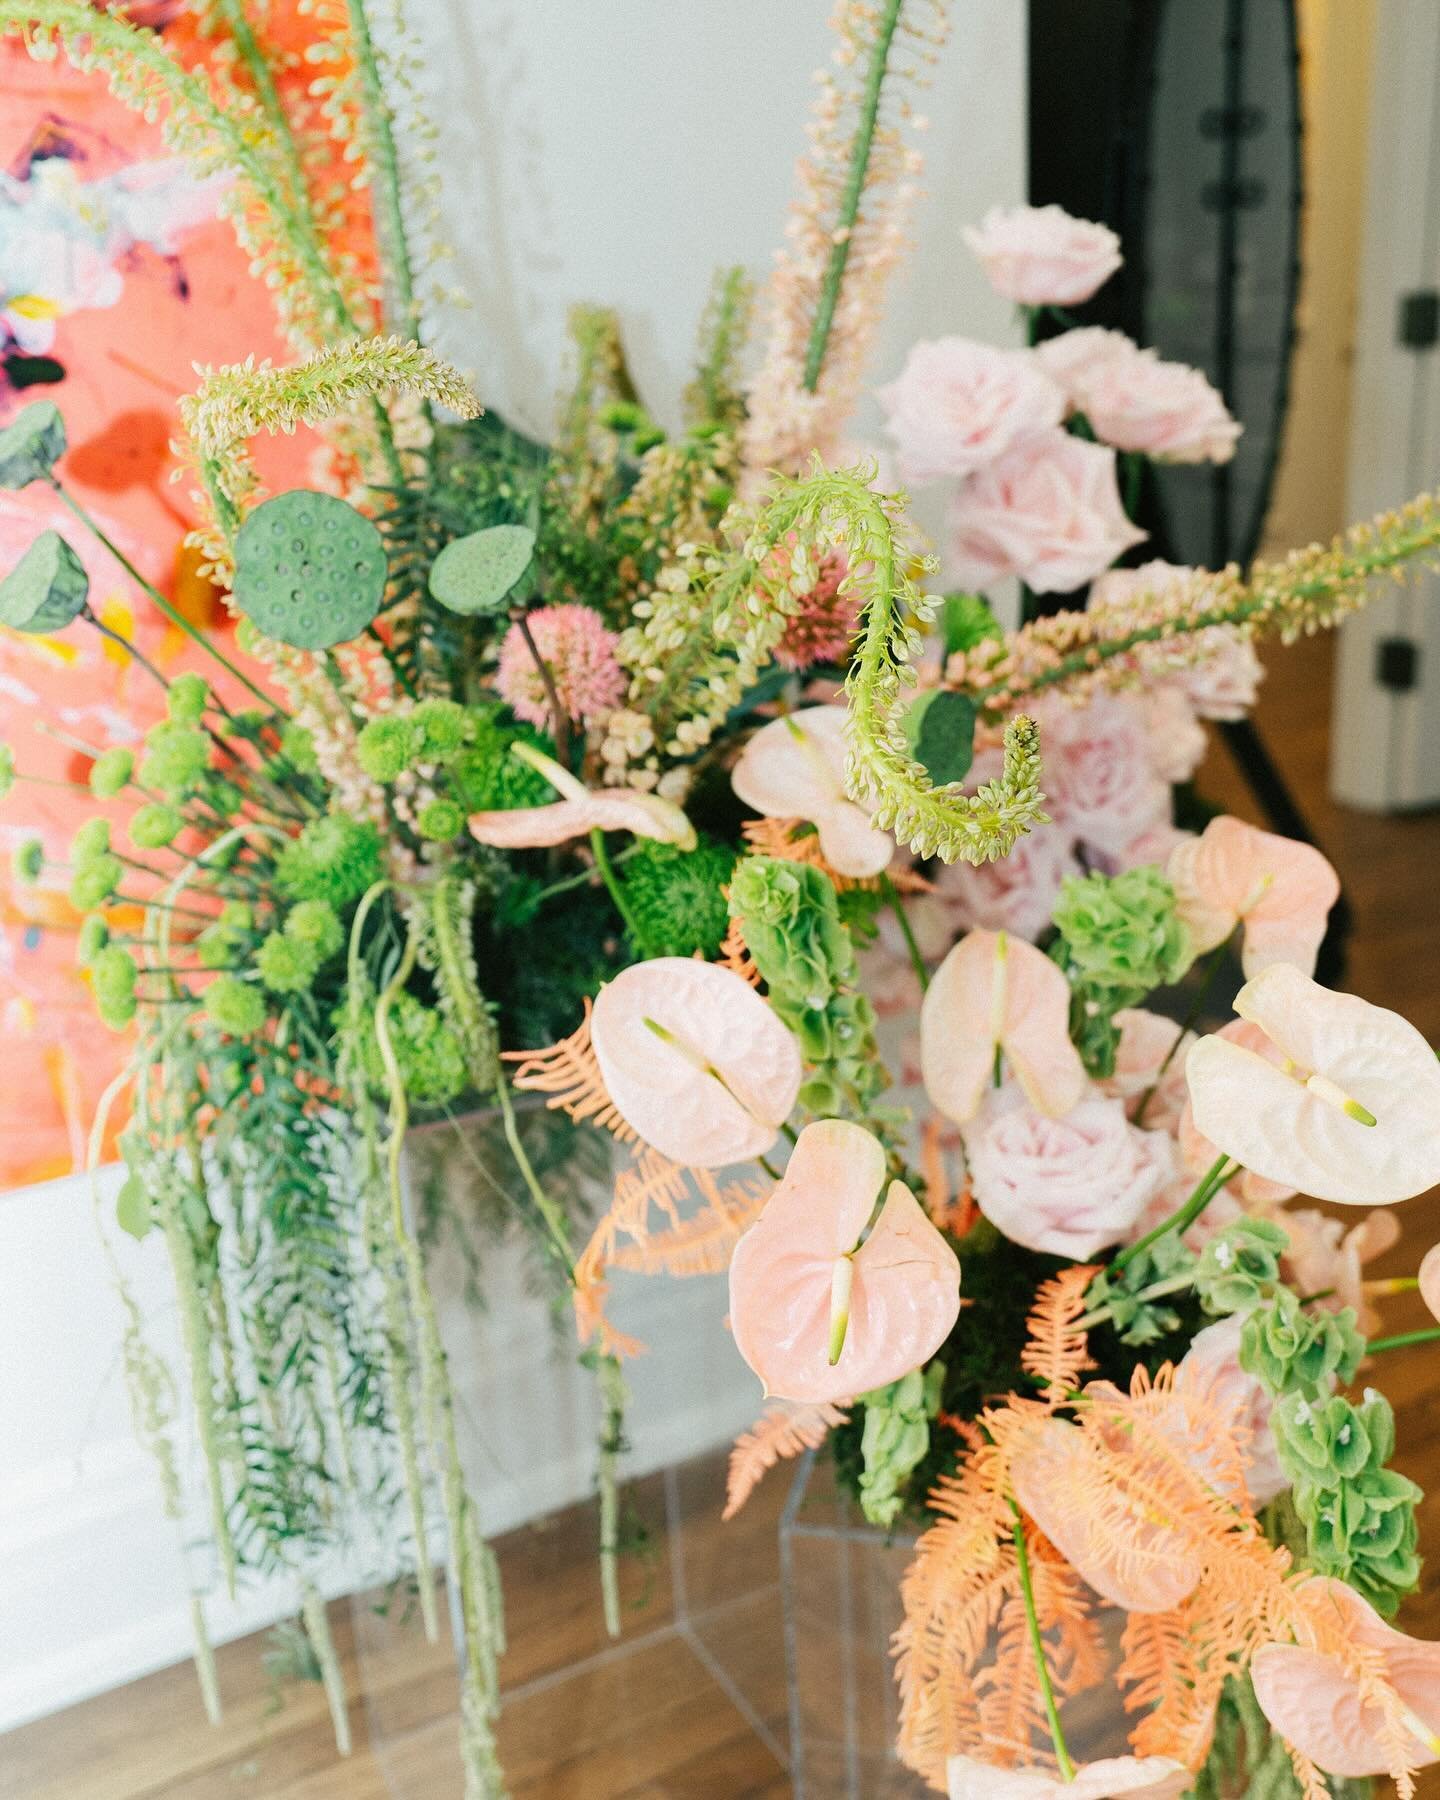 Gorgeous blooms by @bydenizen has me ready for all the colorful Spring decor 💐